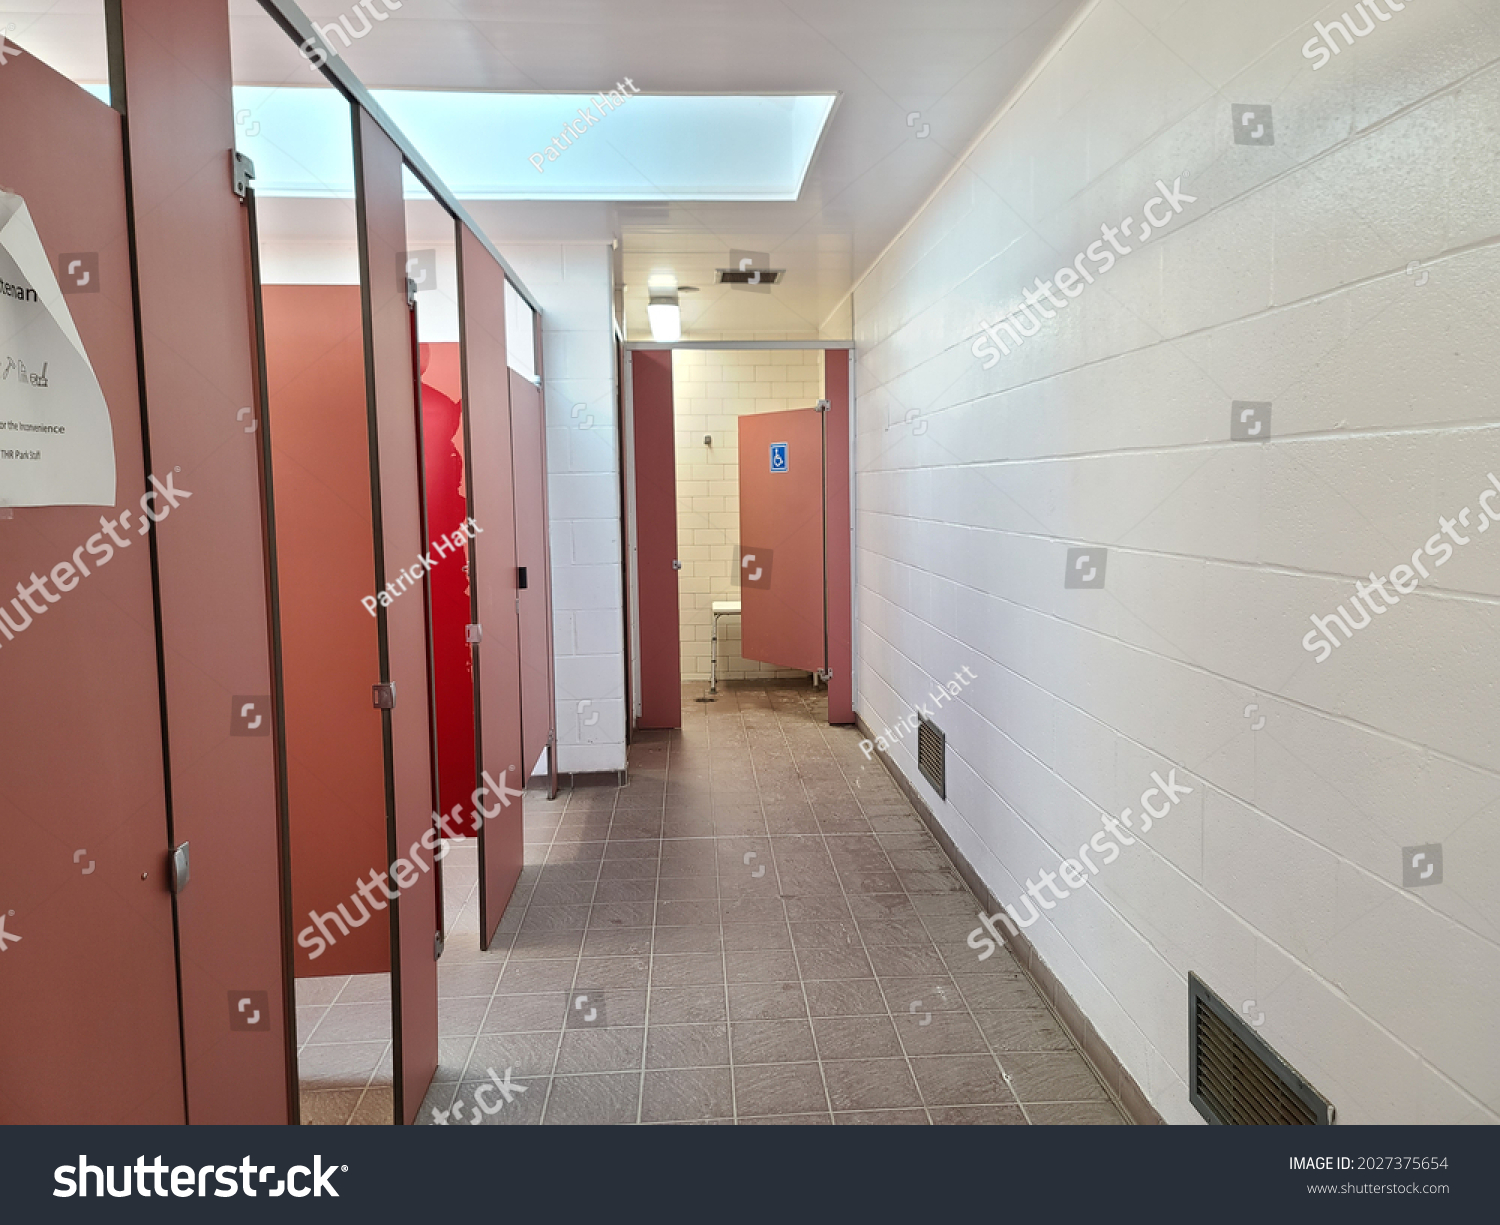 The hallway of a public bathroom. There are several salmon colored stalls in this community restroom. At the end is a larger, handicap stall with a blue handicapped symbol on it. #2027375654